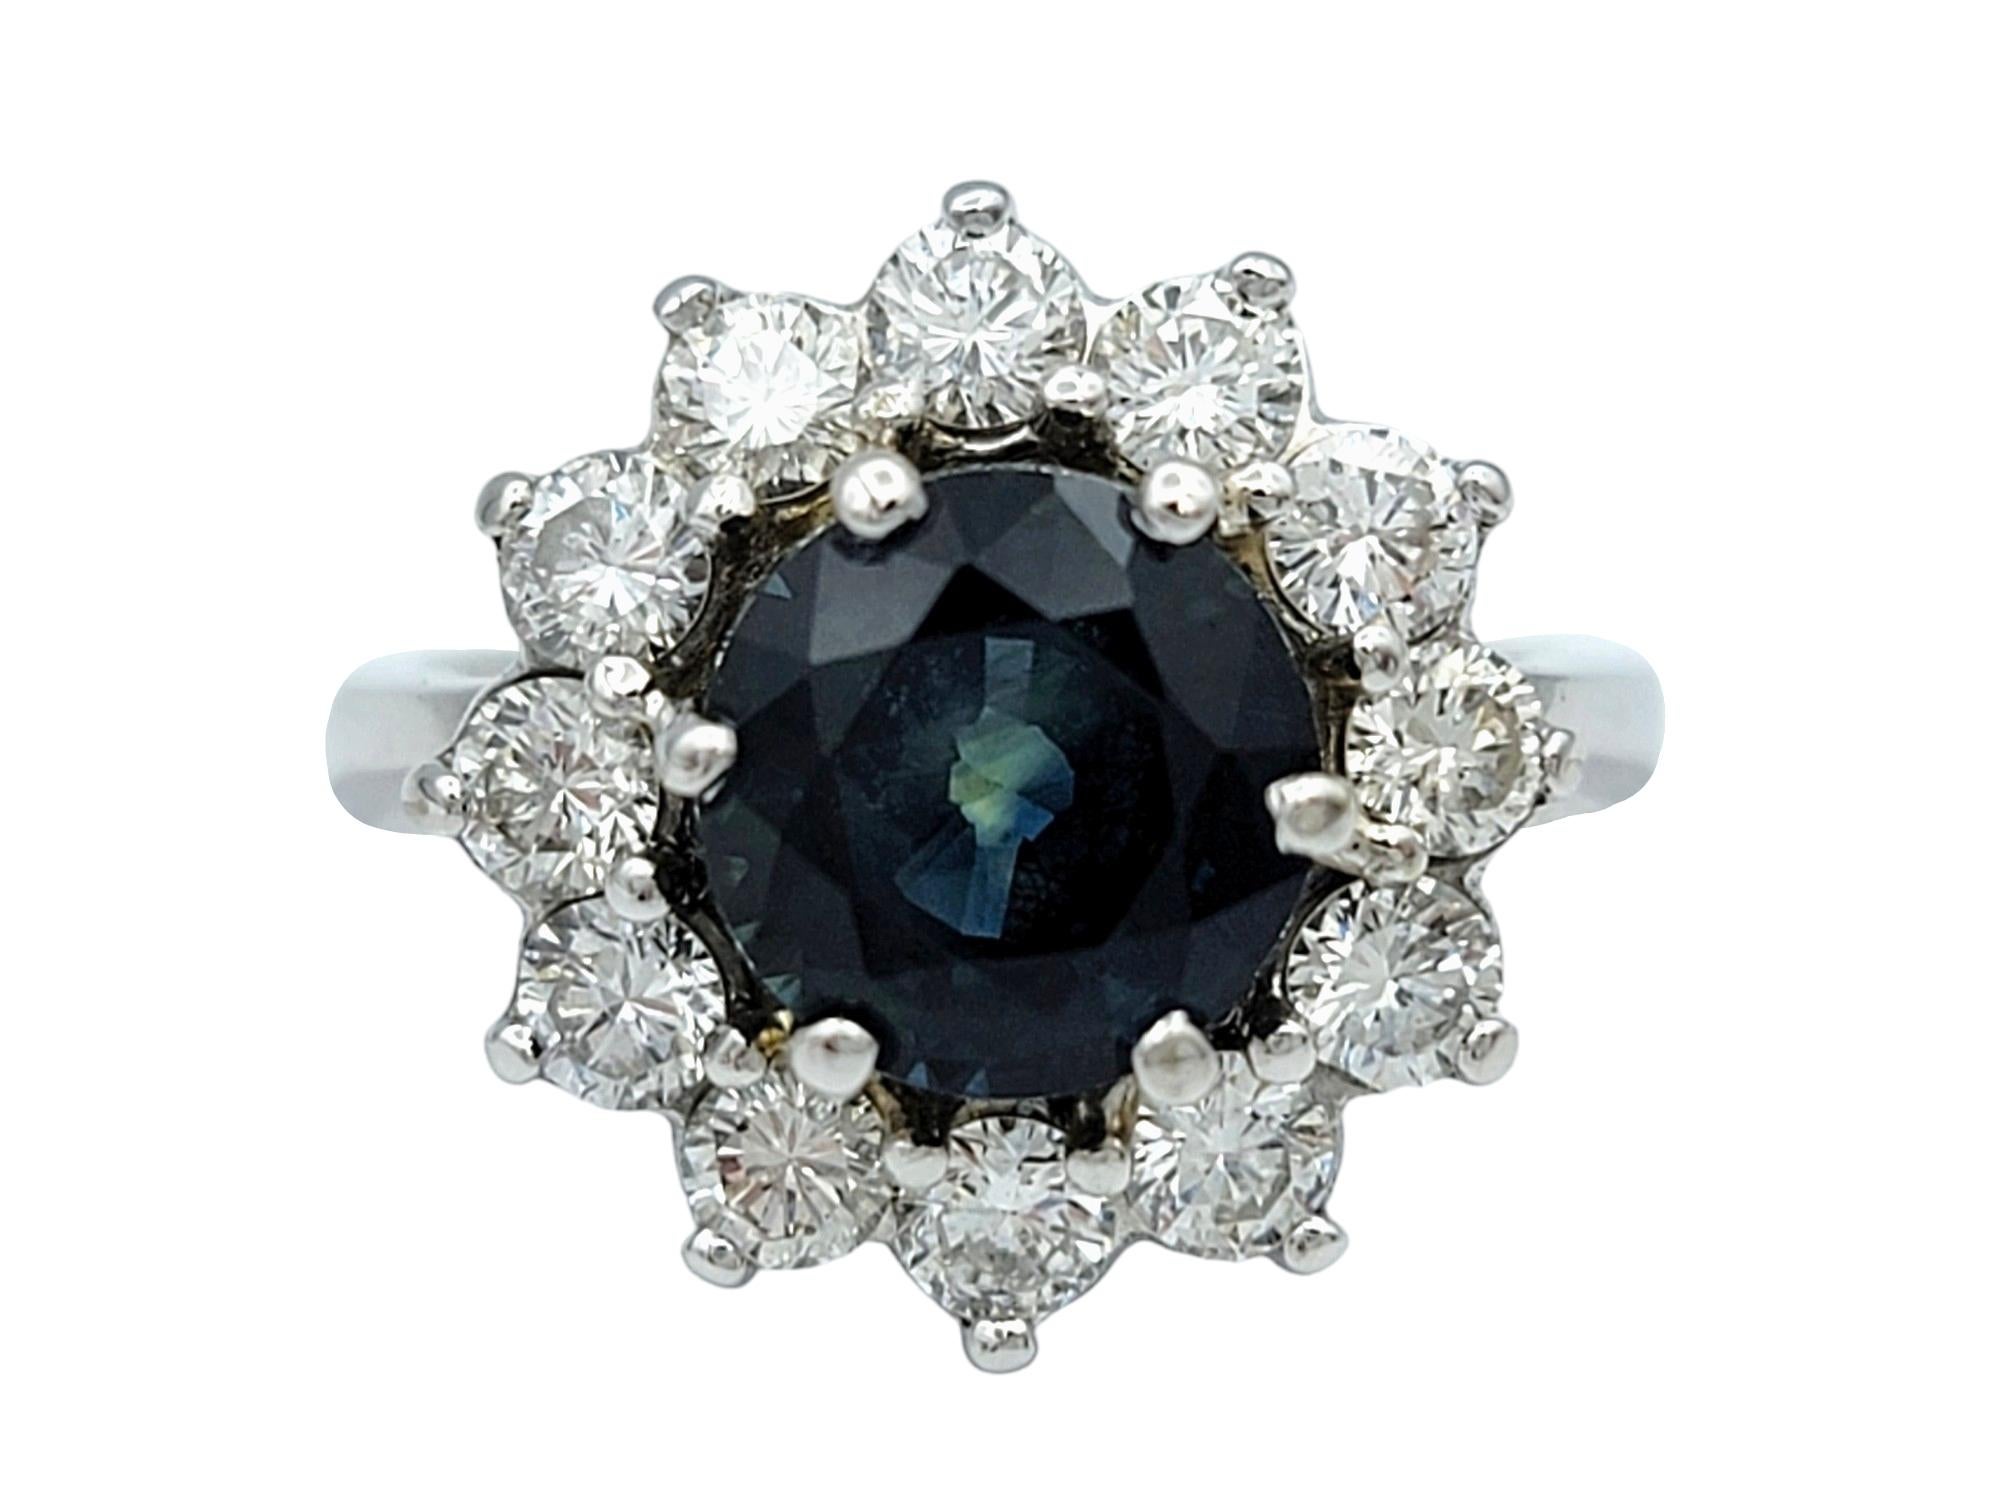 Ring Size: 5

This gorgeous round blue sapphire with diamond halo cocktail ring, set in luxurious 14 karat white gold, is a mesmerizing symbol of sophistication and grace. At its center, a captivating blue sapphire gemstone dazzles with its deep hue